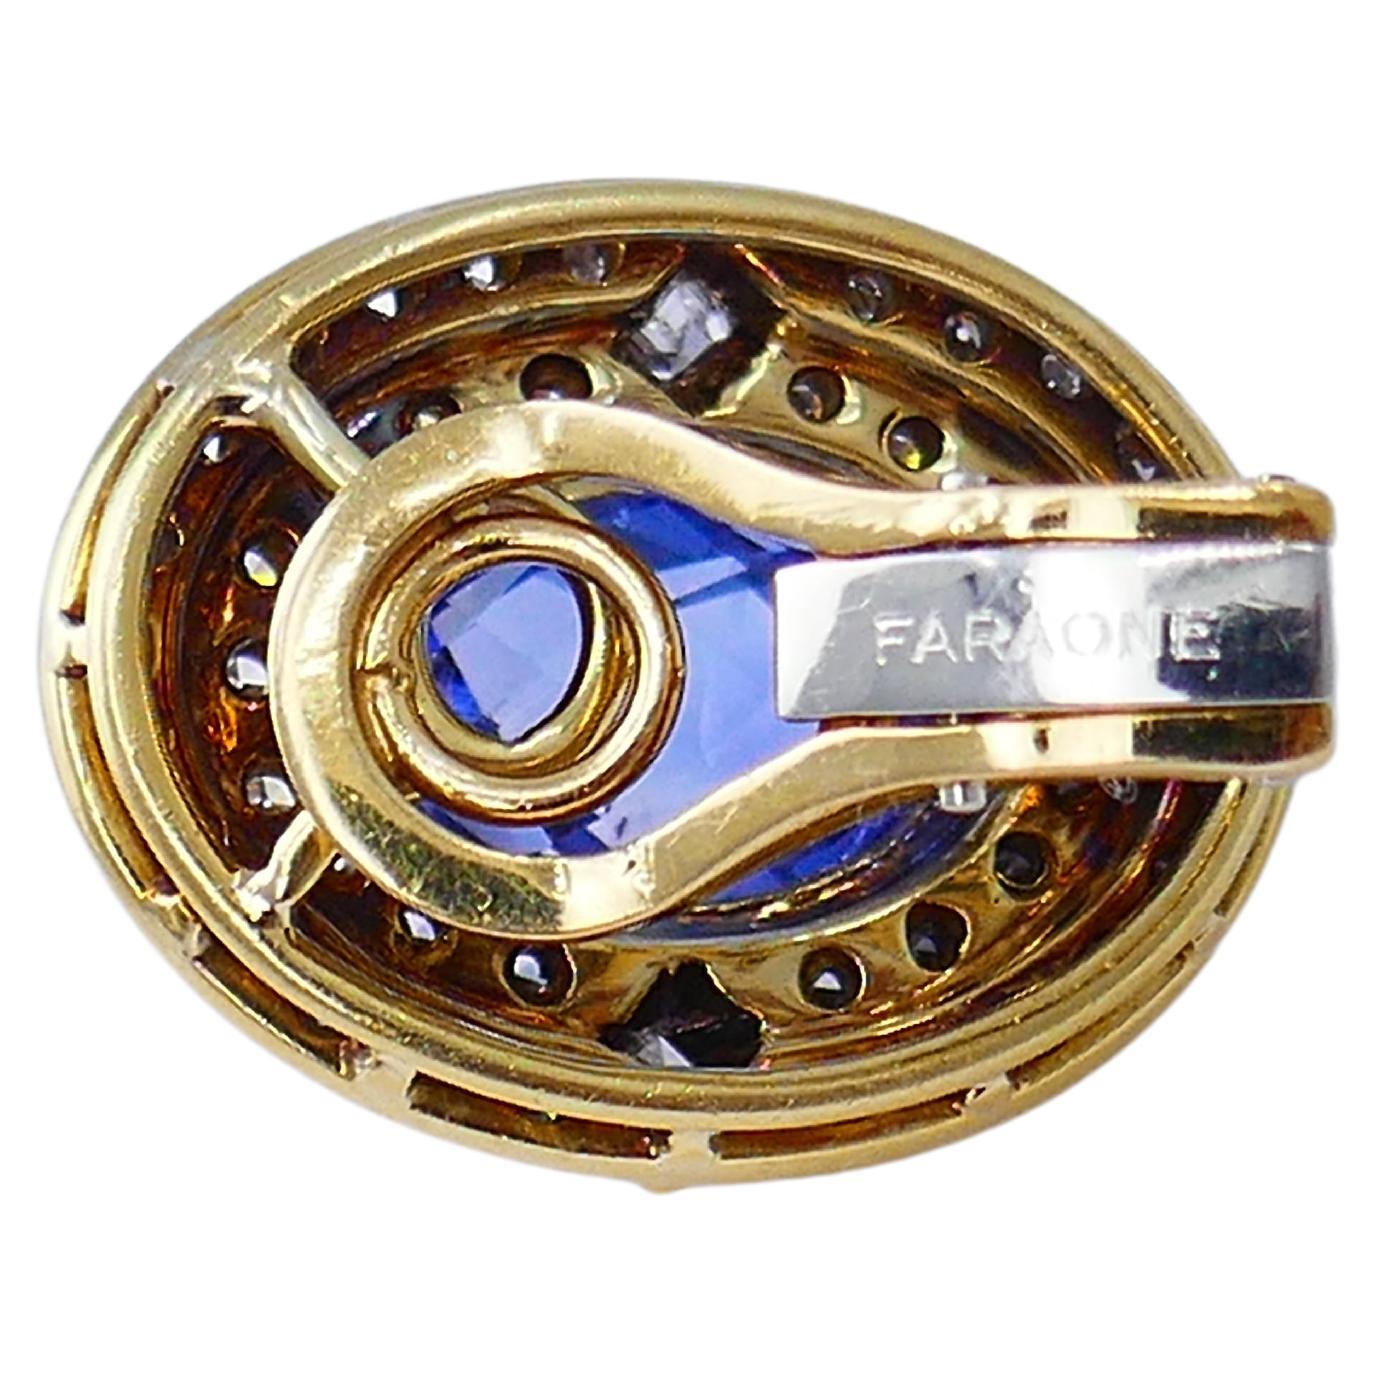 Faraone Vintage Earrings 18k Gold Sapphire Diamond Italian Estate Jewelry In Excellent Condition For Sale In Beverly Hills, CA